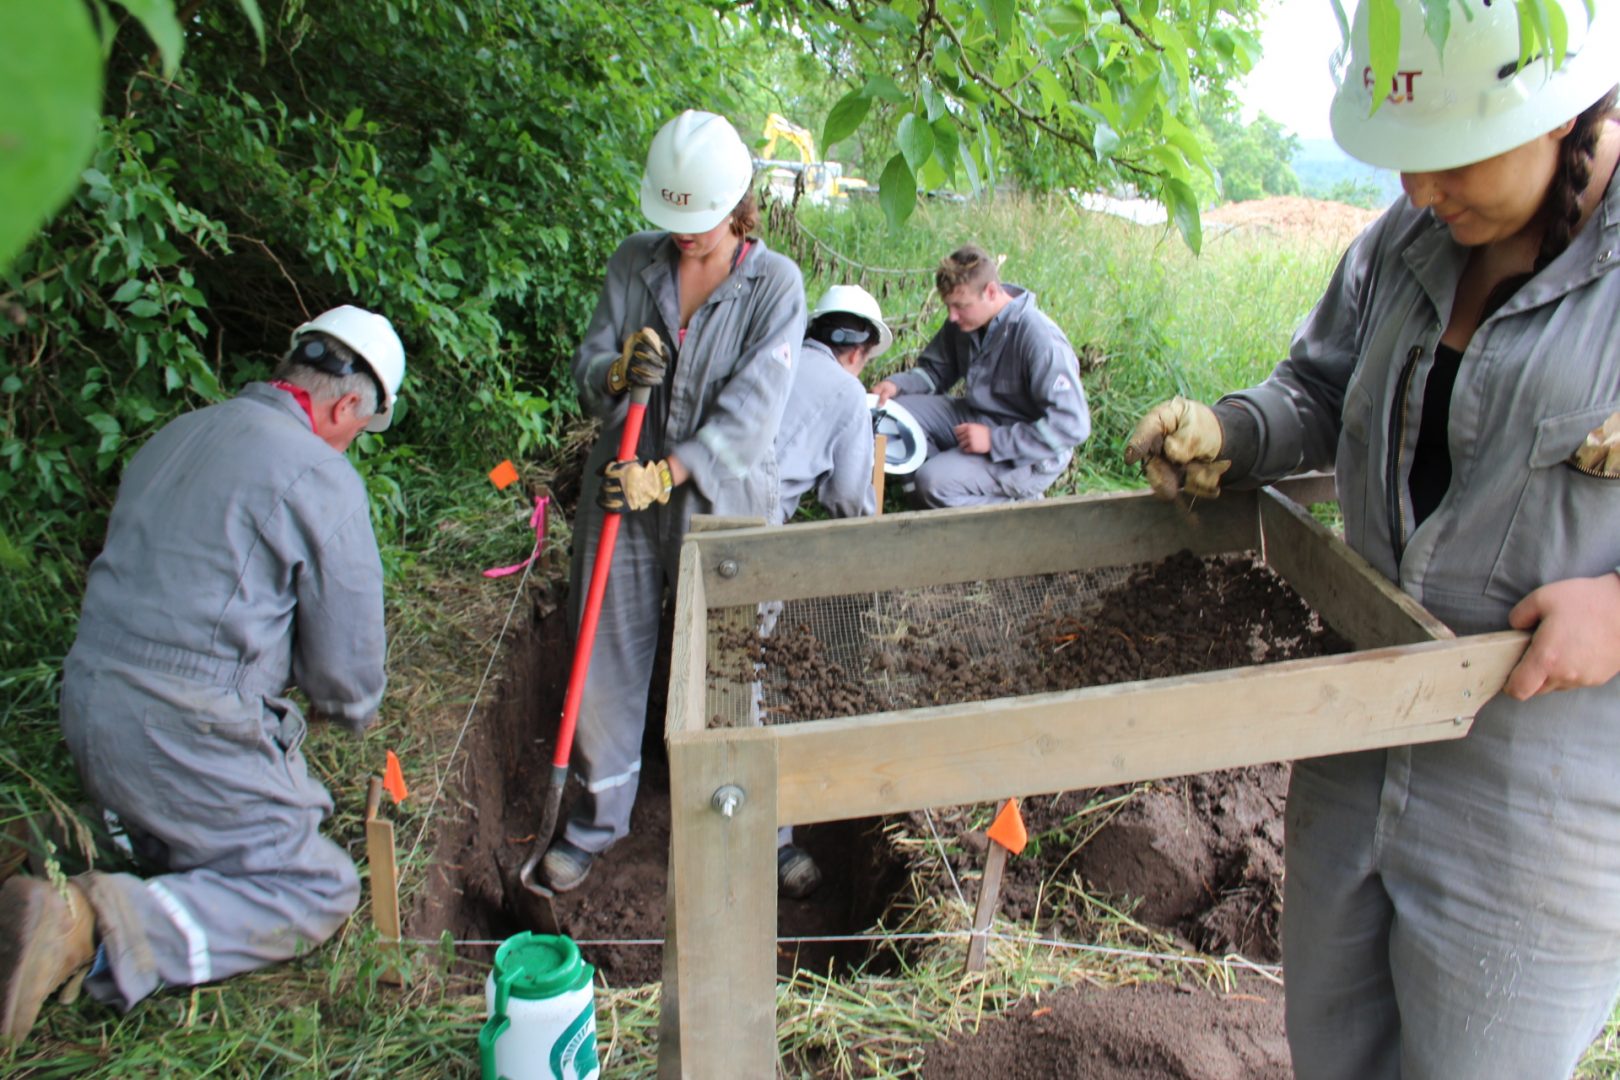 Archaeology students from West Virginia University at a dig near a shale gas site in Marianna, Pa. 